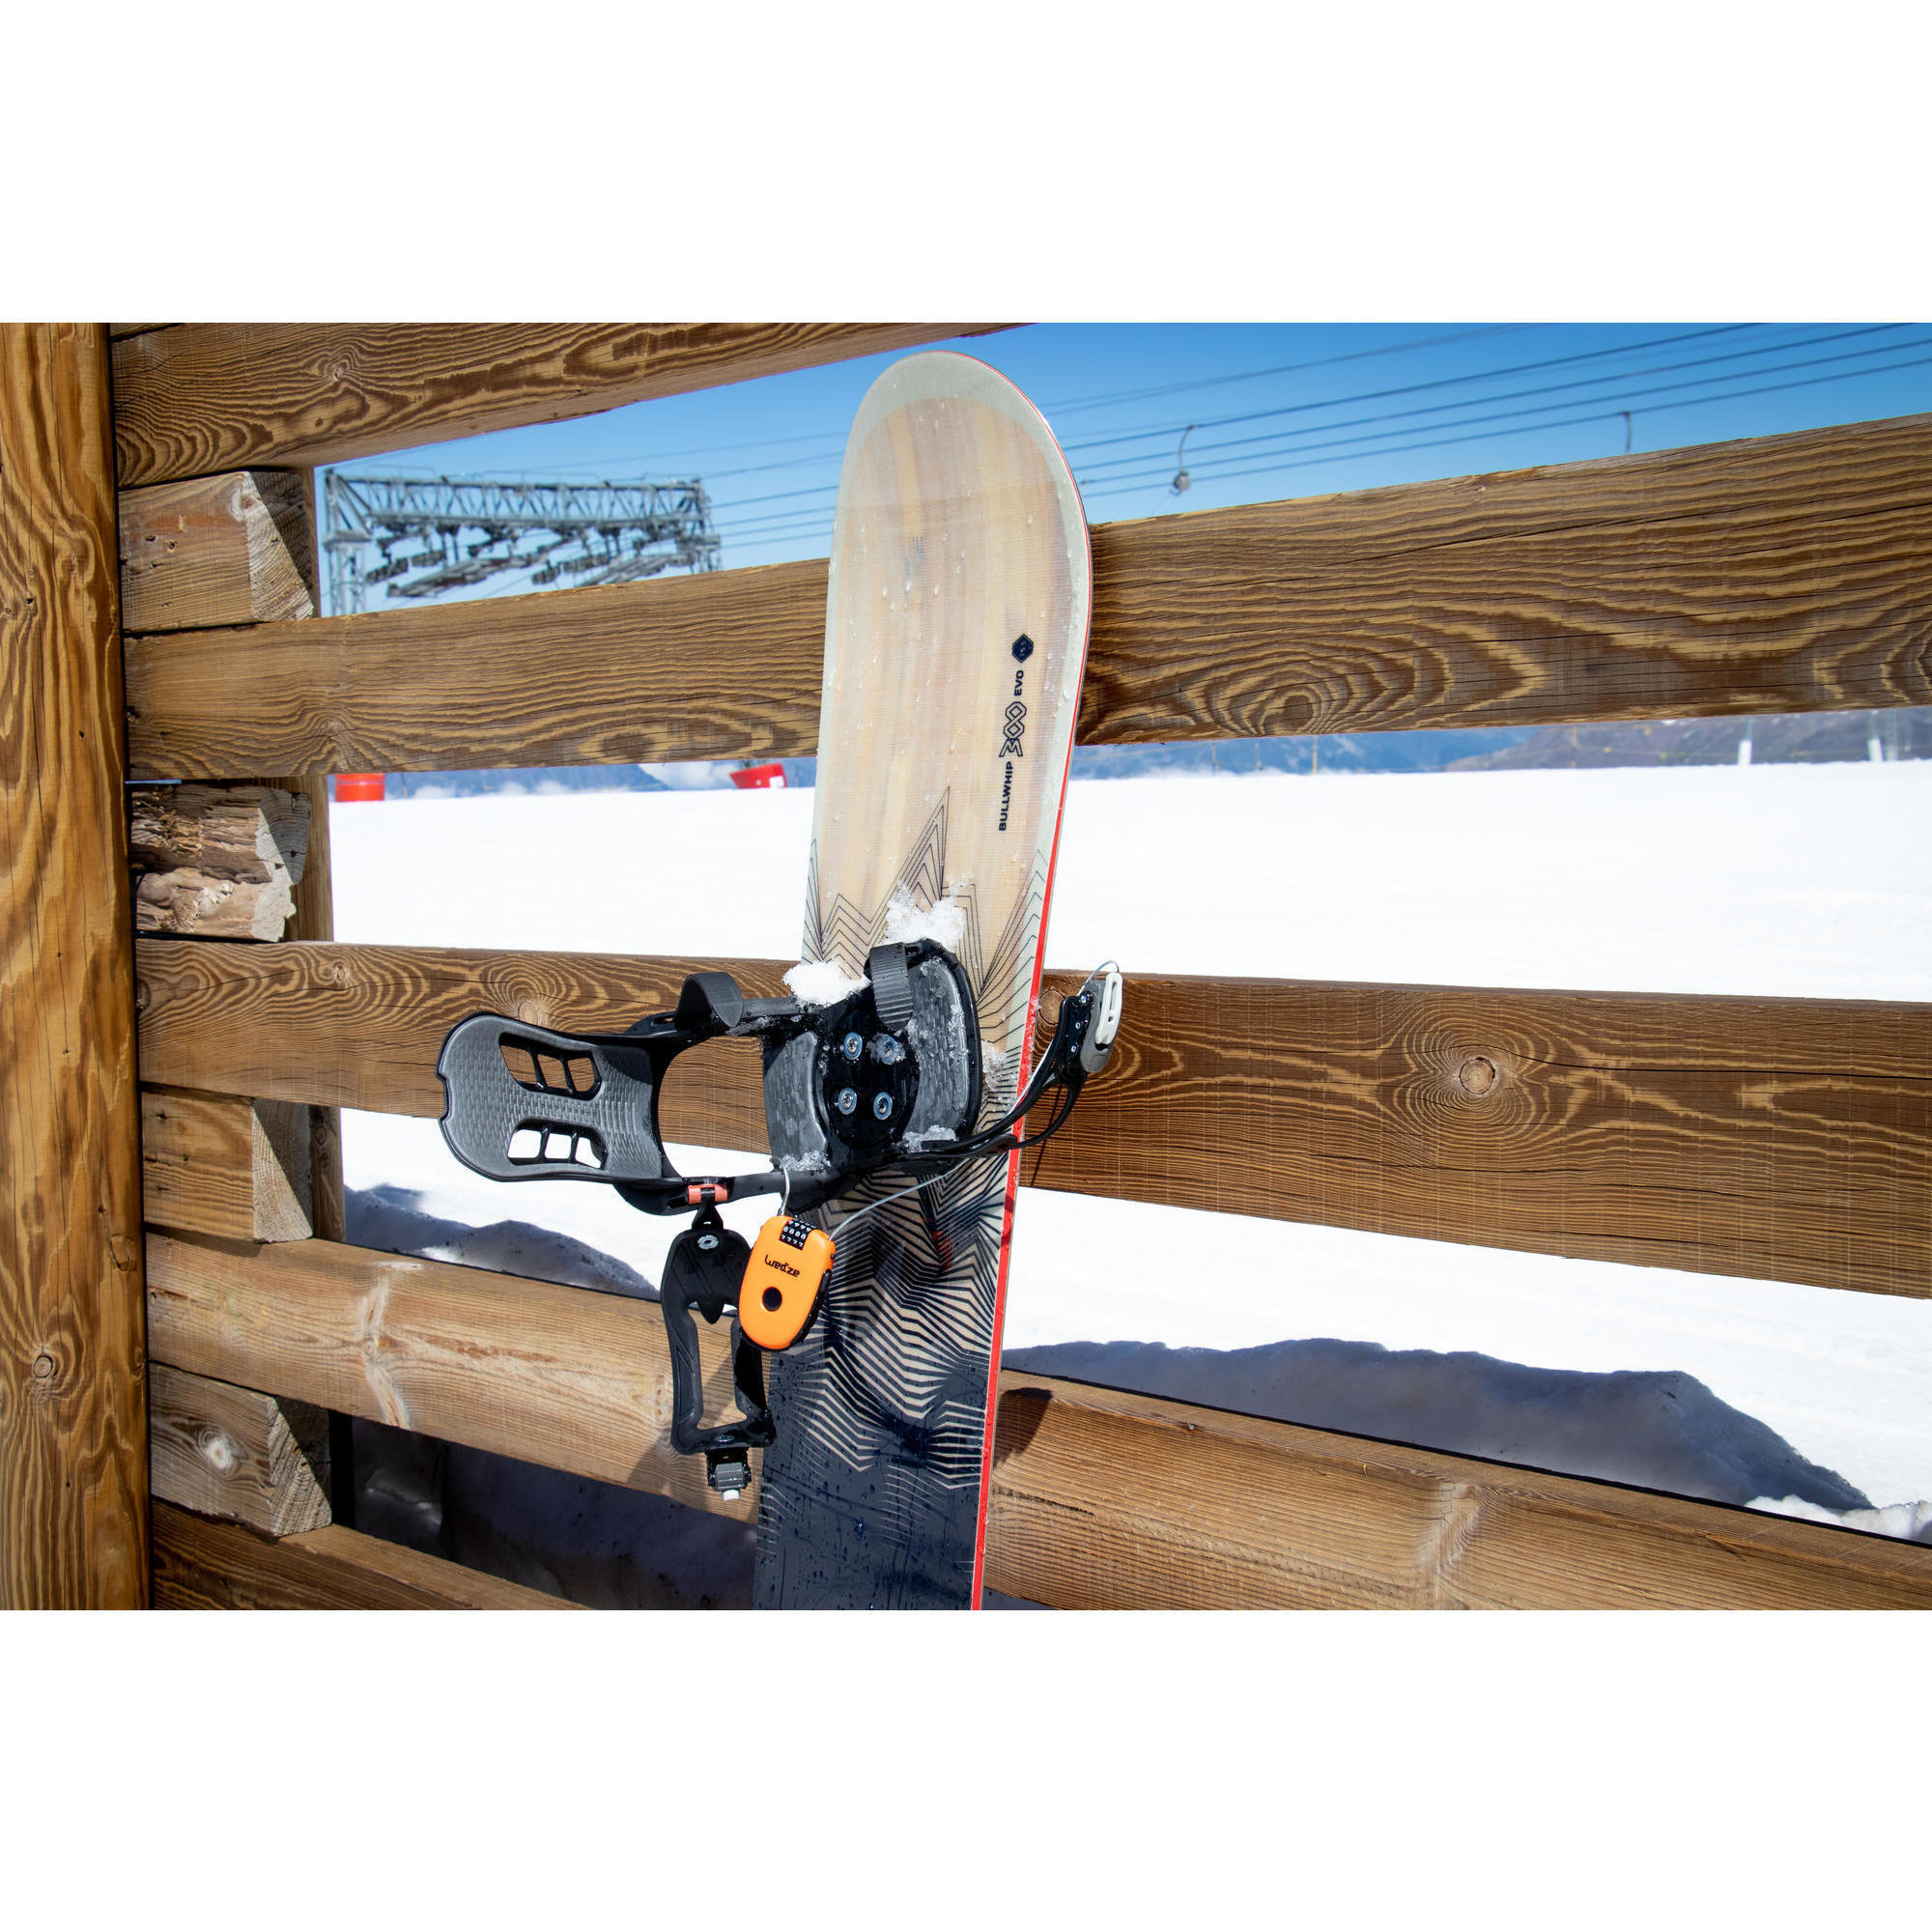 Anti-theft lock for snowboard or pair of skis 2/5